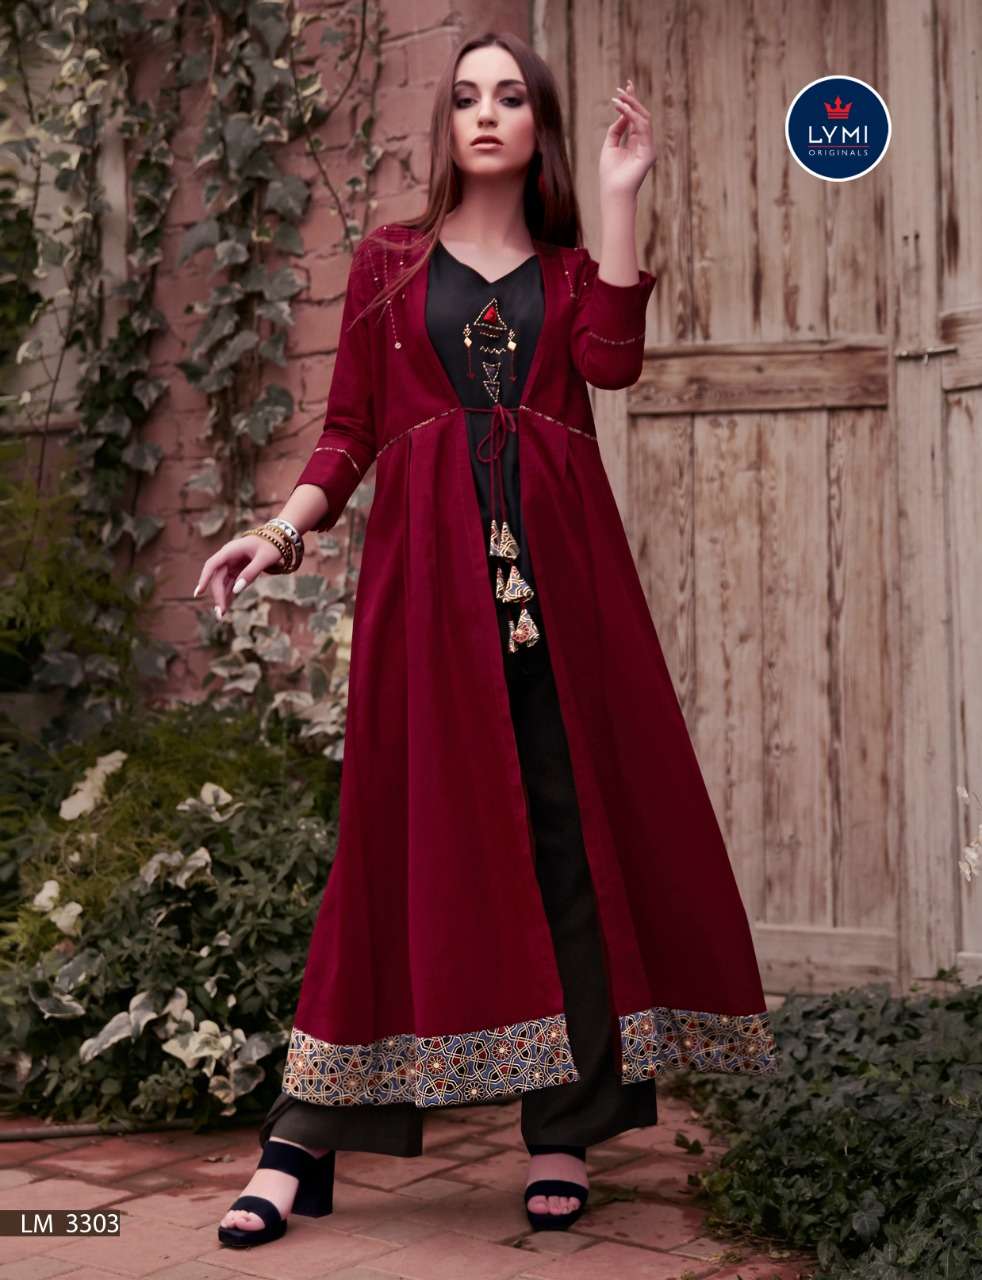 GENESIS BY LYMI ORIGINAL 3301 TO 3308 SERIES BEAUTIFUL STYLISH FANCY COLORFUL CASUAL WEAR & ETHNIC WEAR HAND WORK ON RAYON KURTIS AT WHOLESALE PRICE